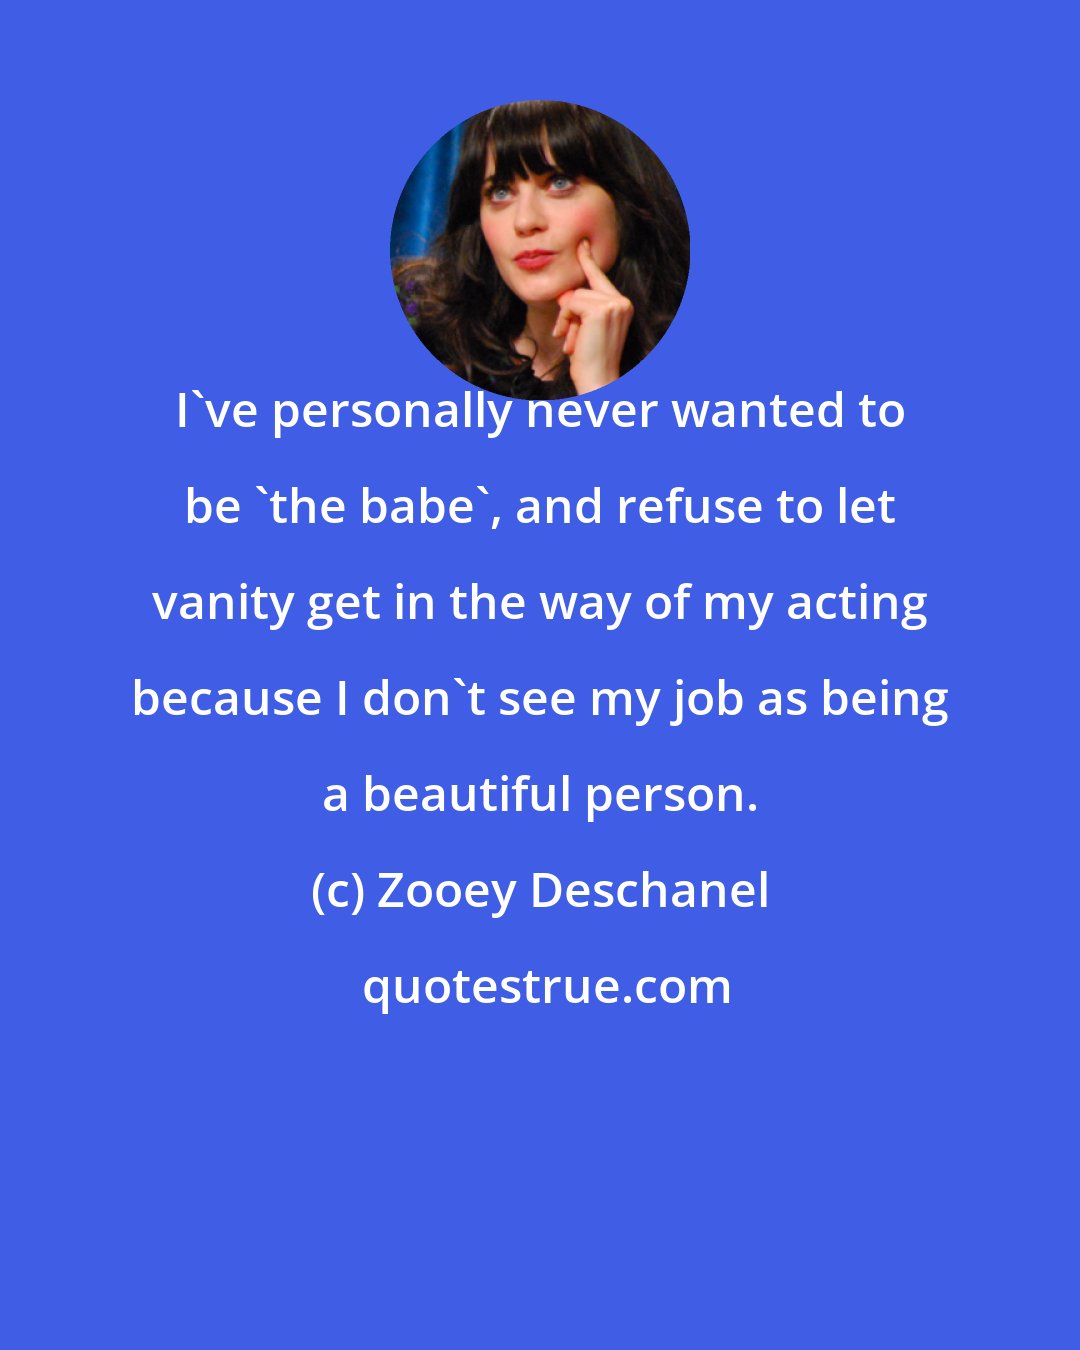 Zooey Deschanel: I've personally never wanted to be 'the babe', and refuse to let vanity get in the way of my acting because I don't see my job as being a beautiful person.